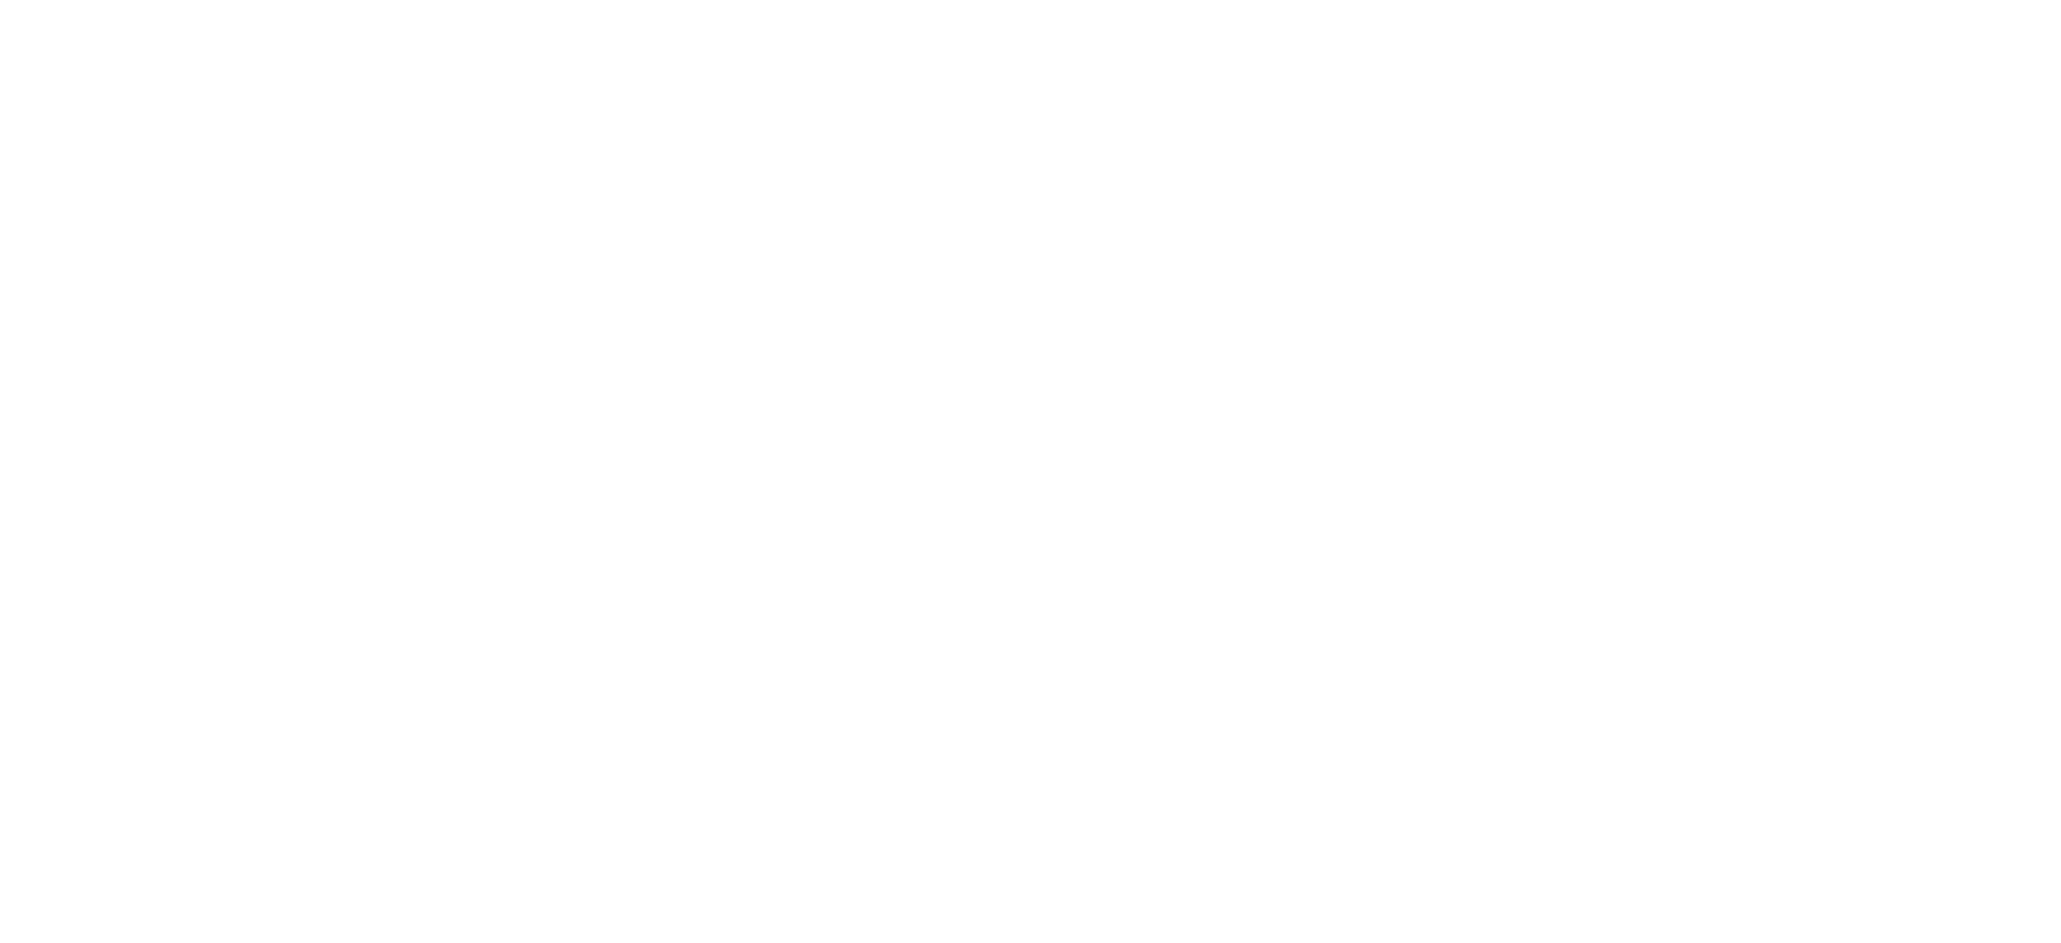 The Wear Recovery logo in white